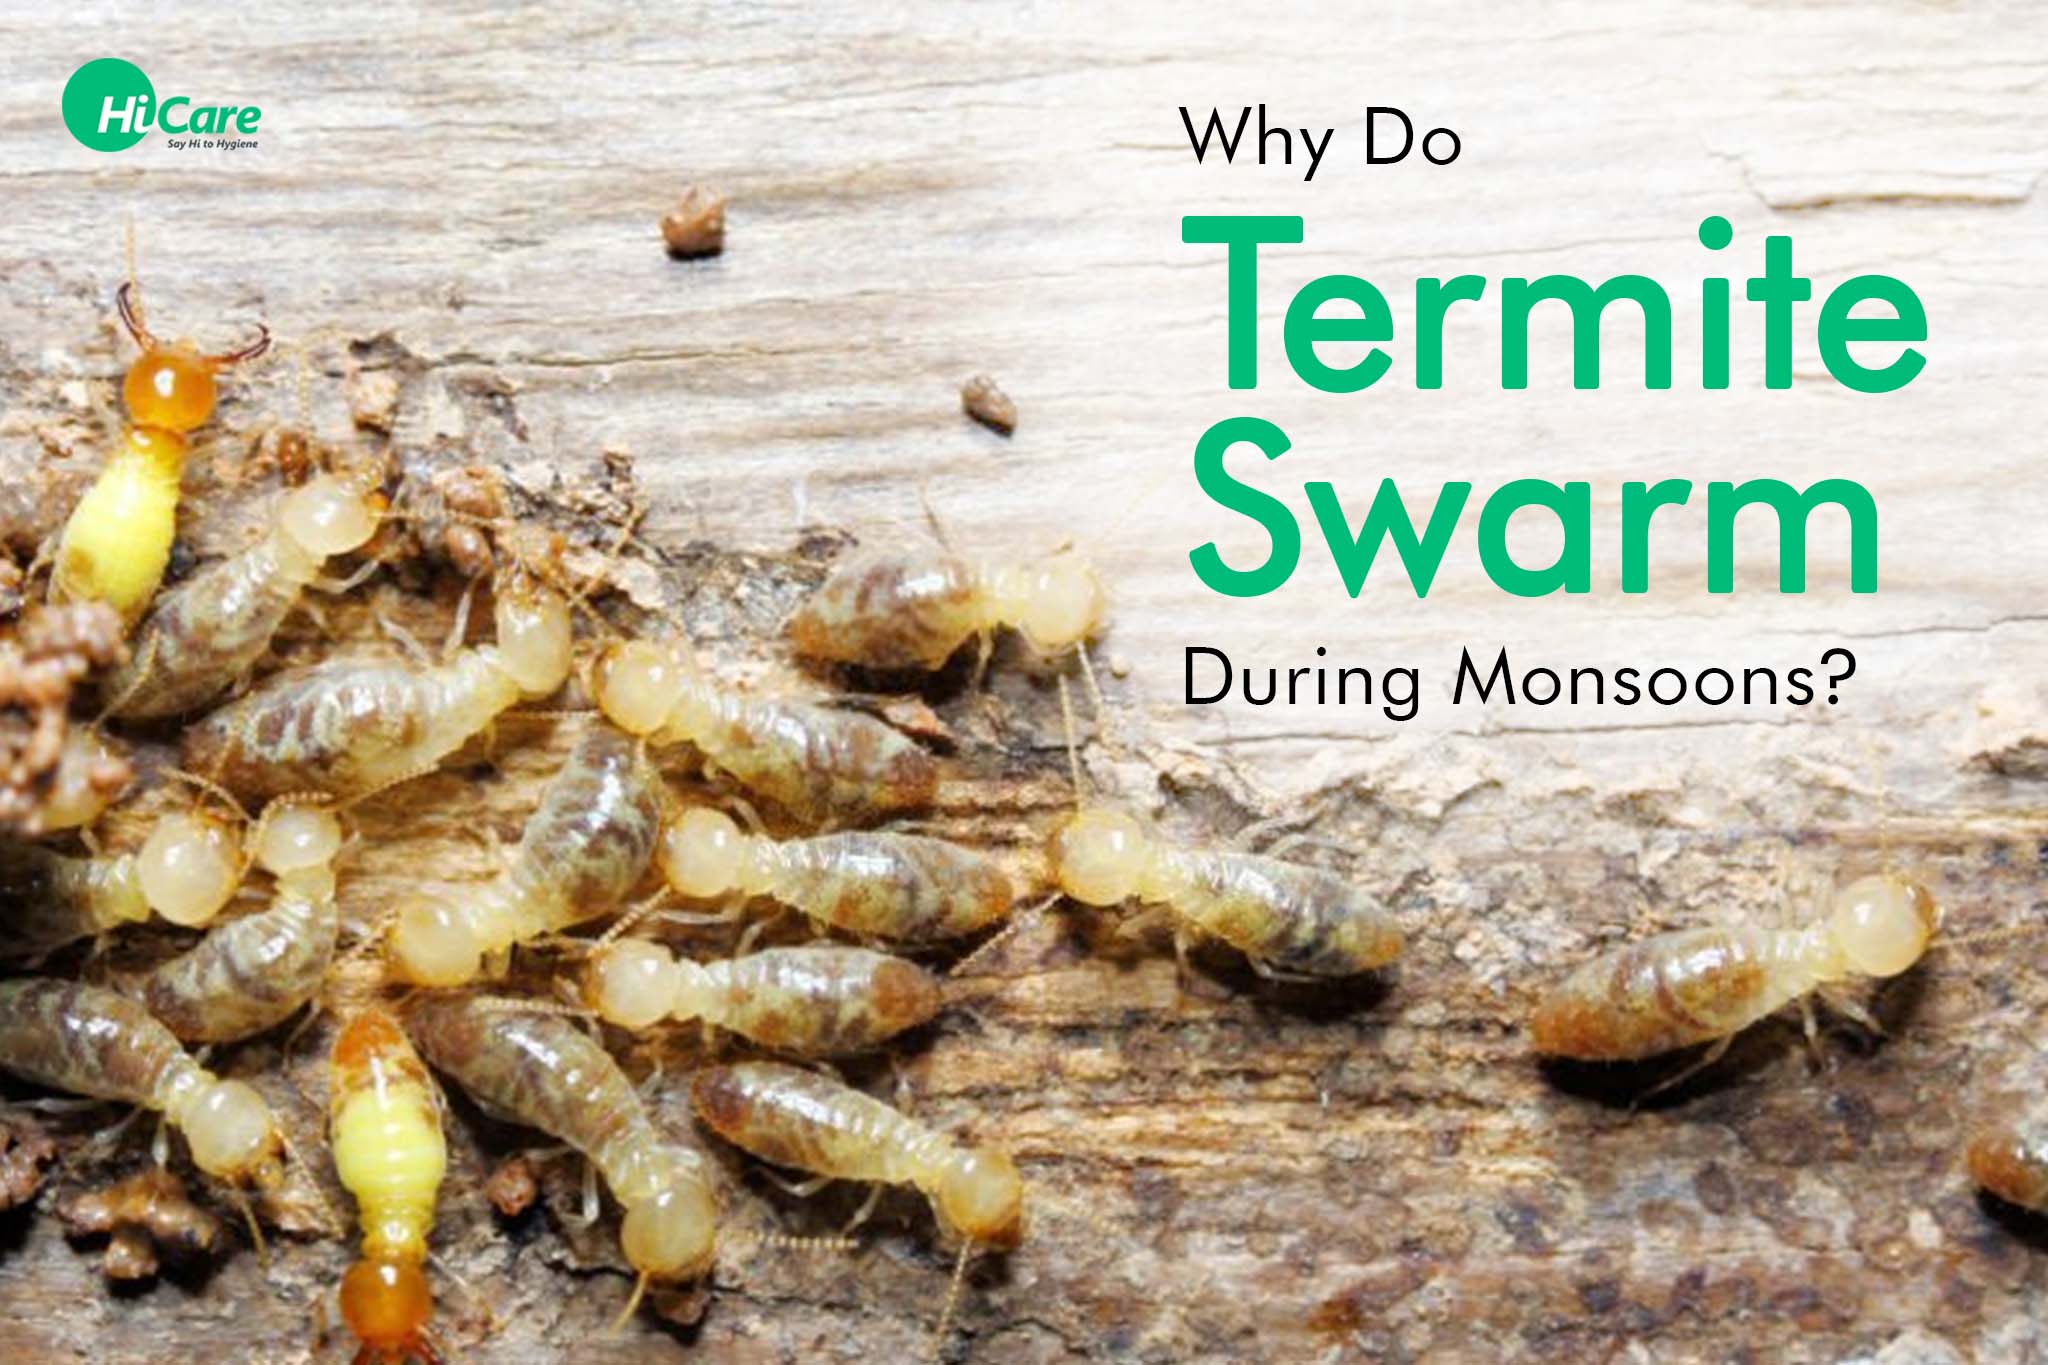 why do termite swarm during monsoons